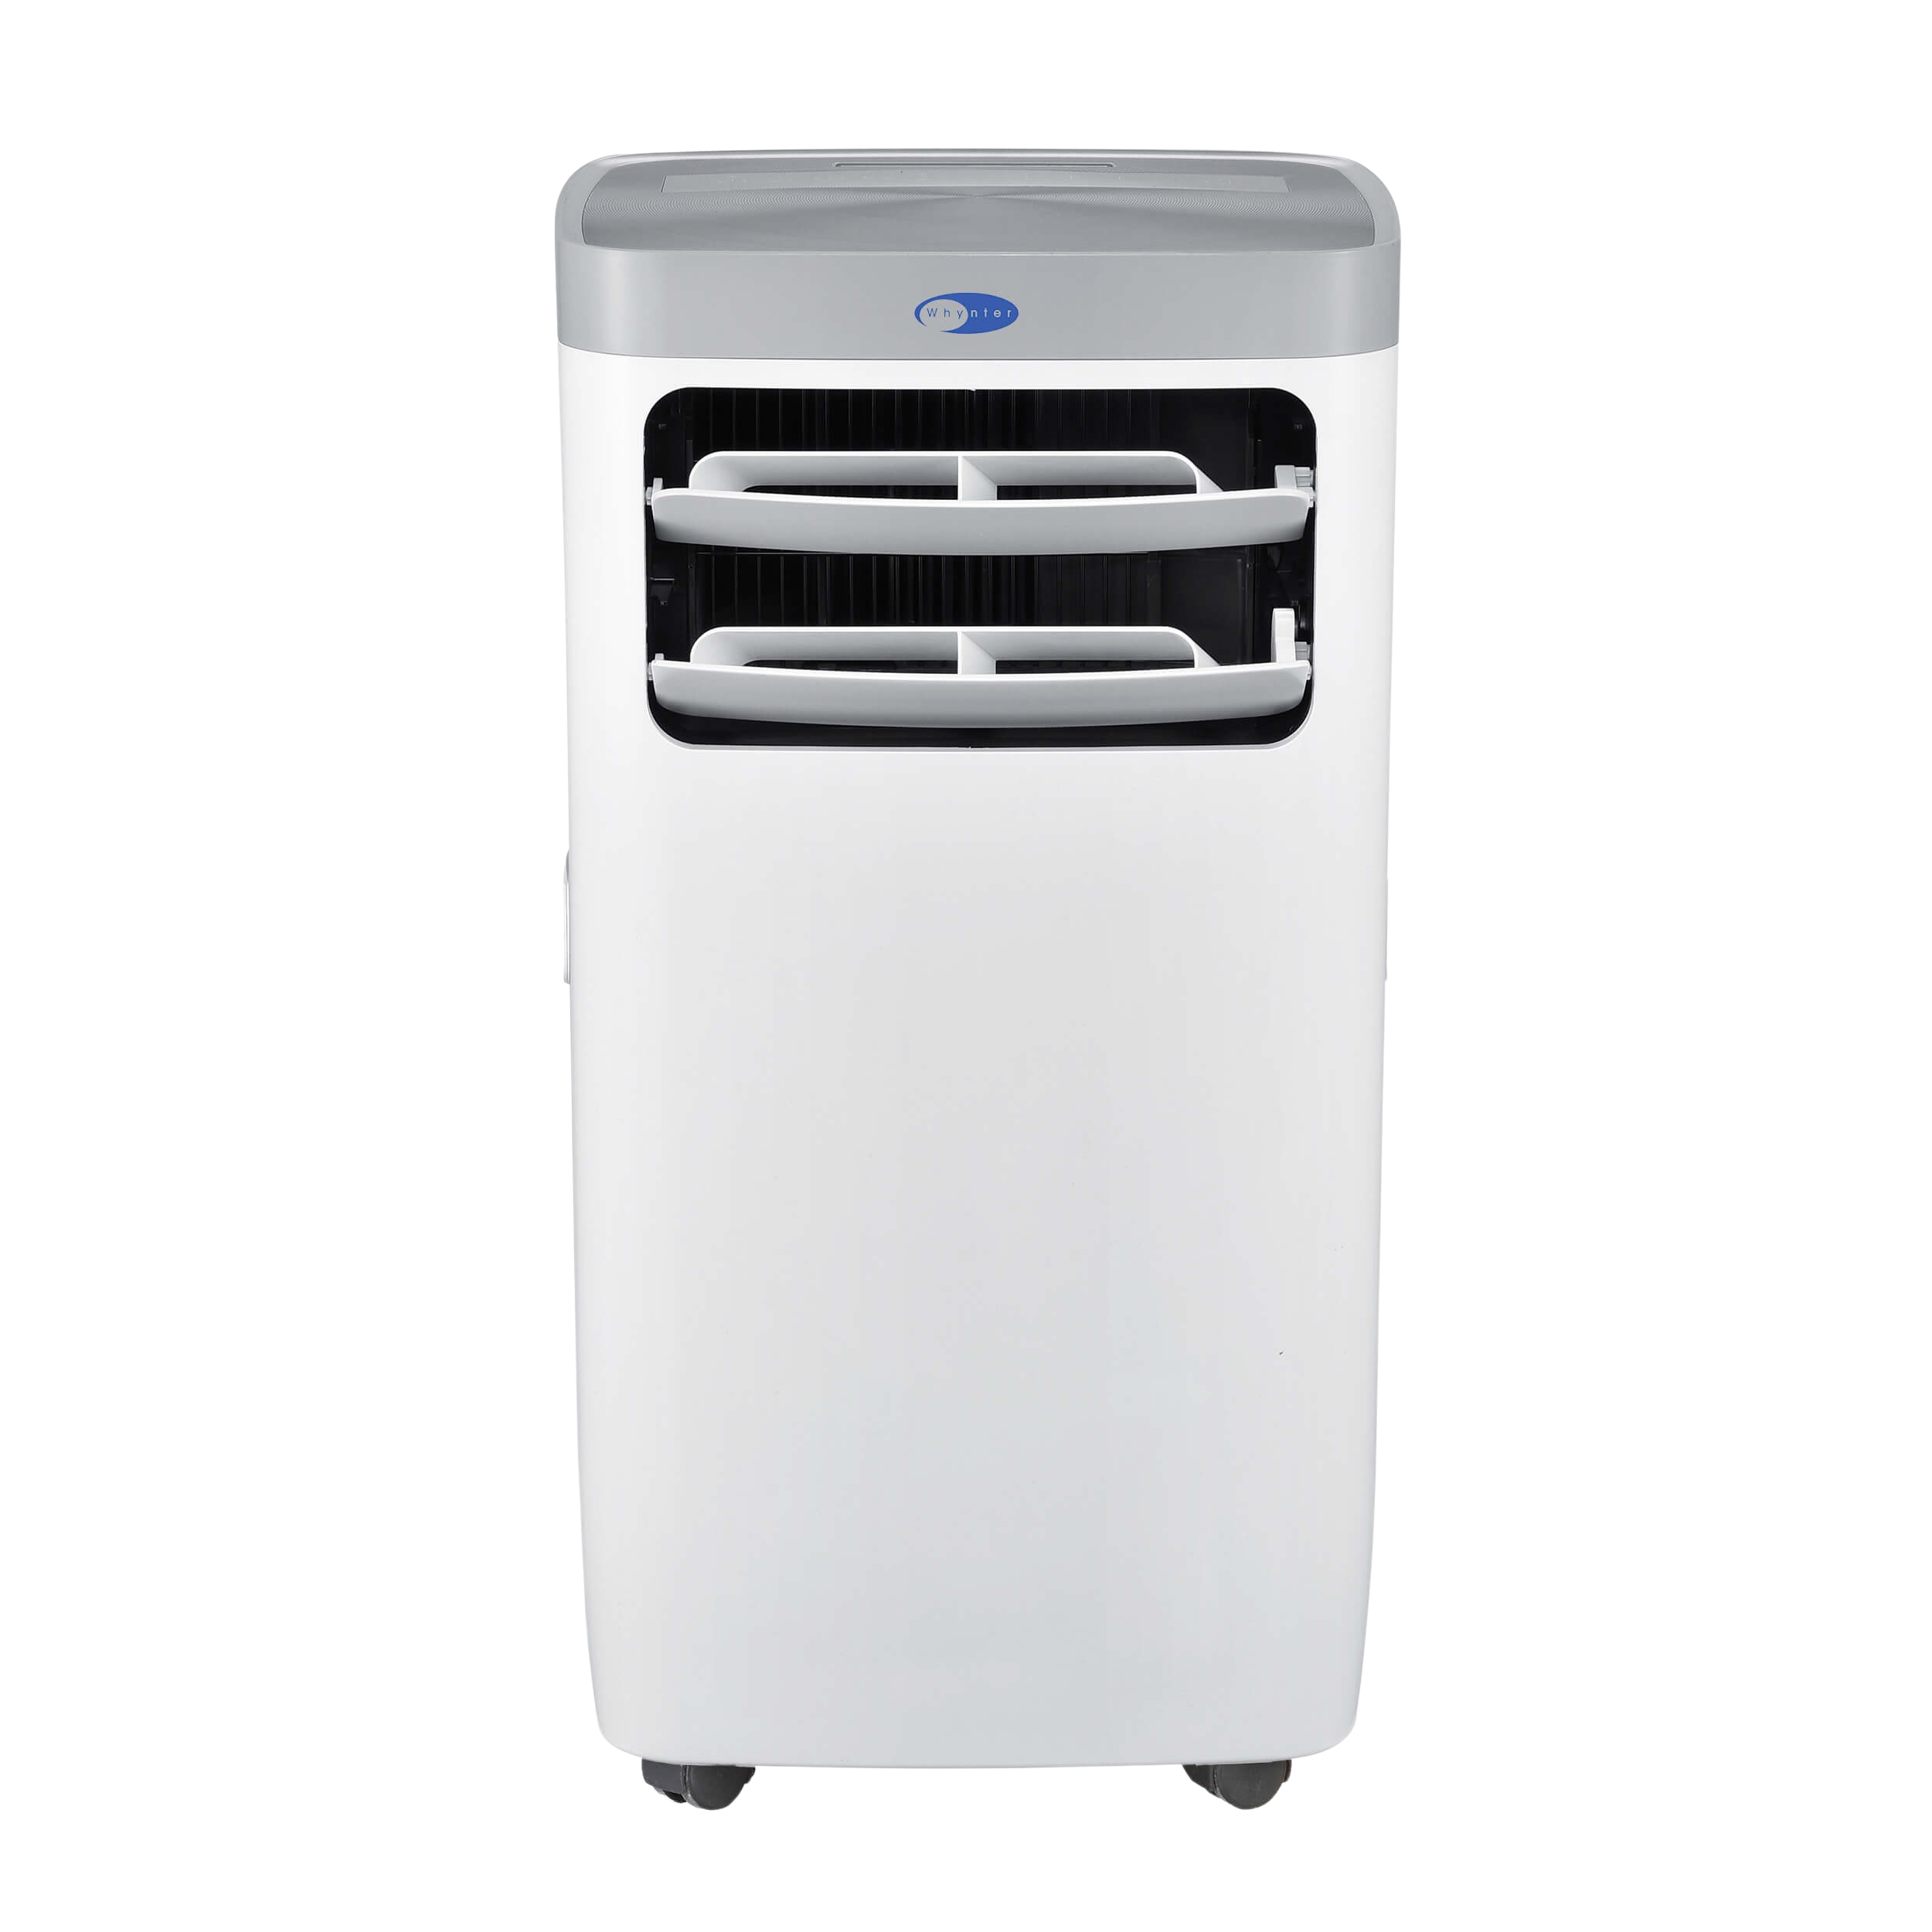 Whynter, Whynter ARC-115WG 11,000 BTU Portable Air Conditioner and Dehumidifier White New